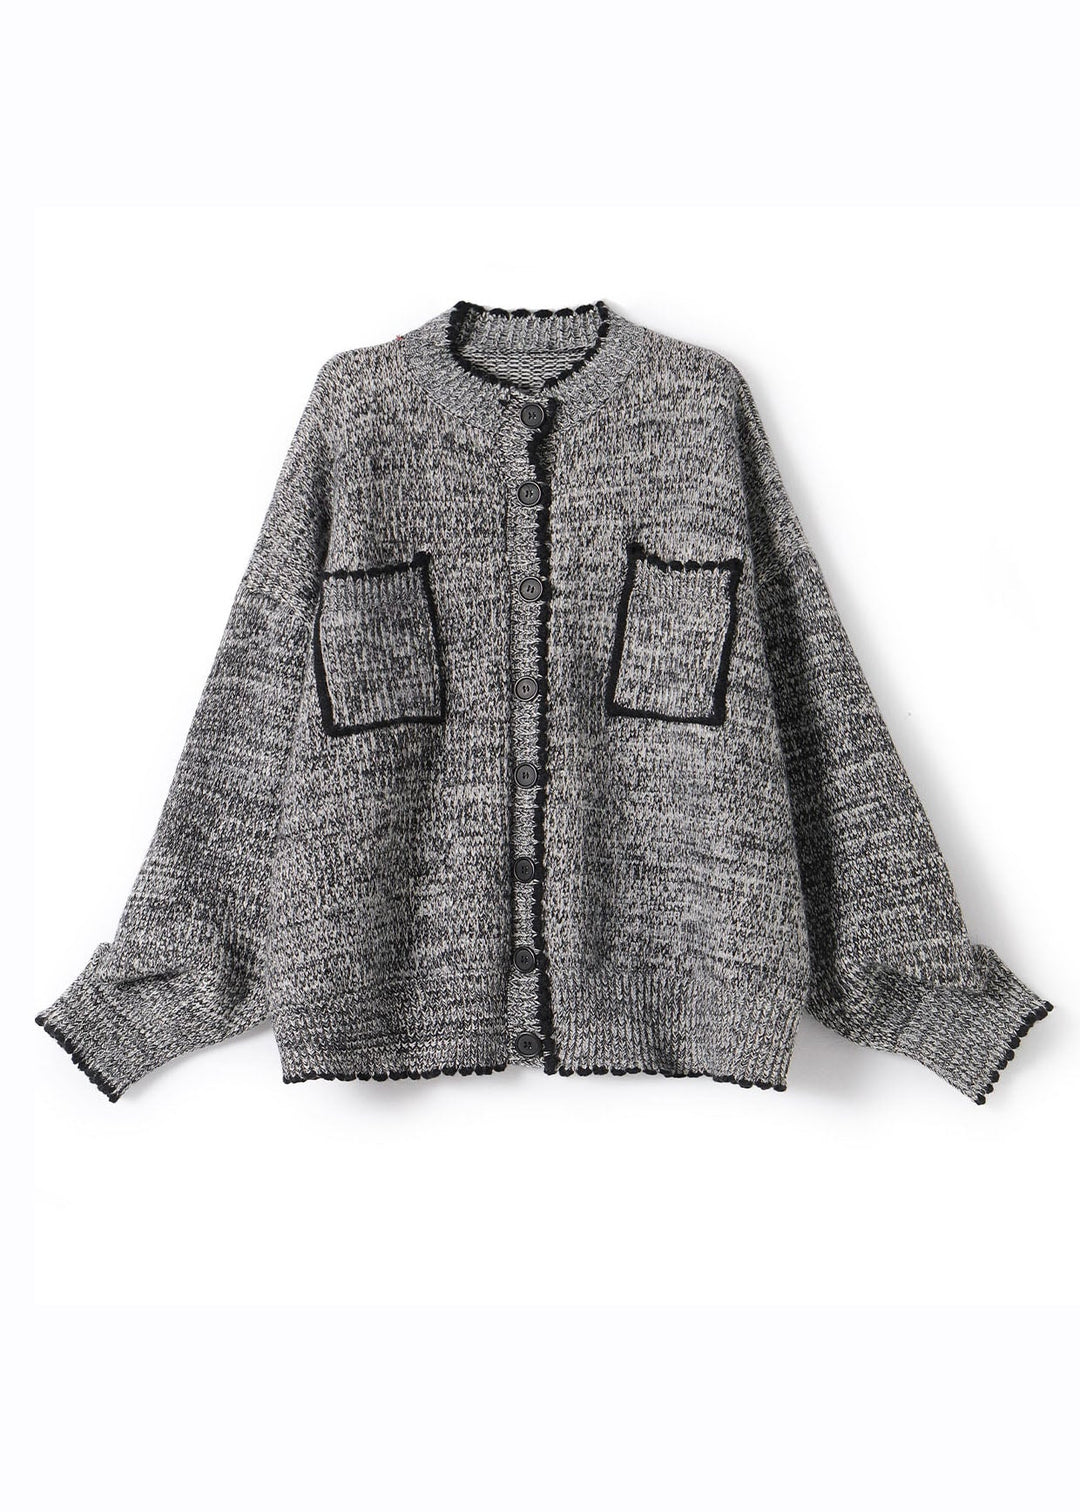 Casual Grey O-Neck Patchwork Button Cotton Knit Cardigans Fall